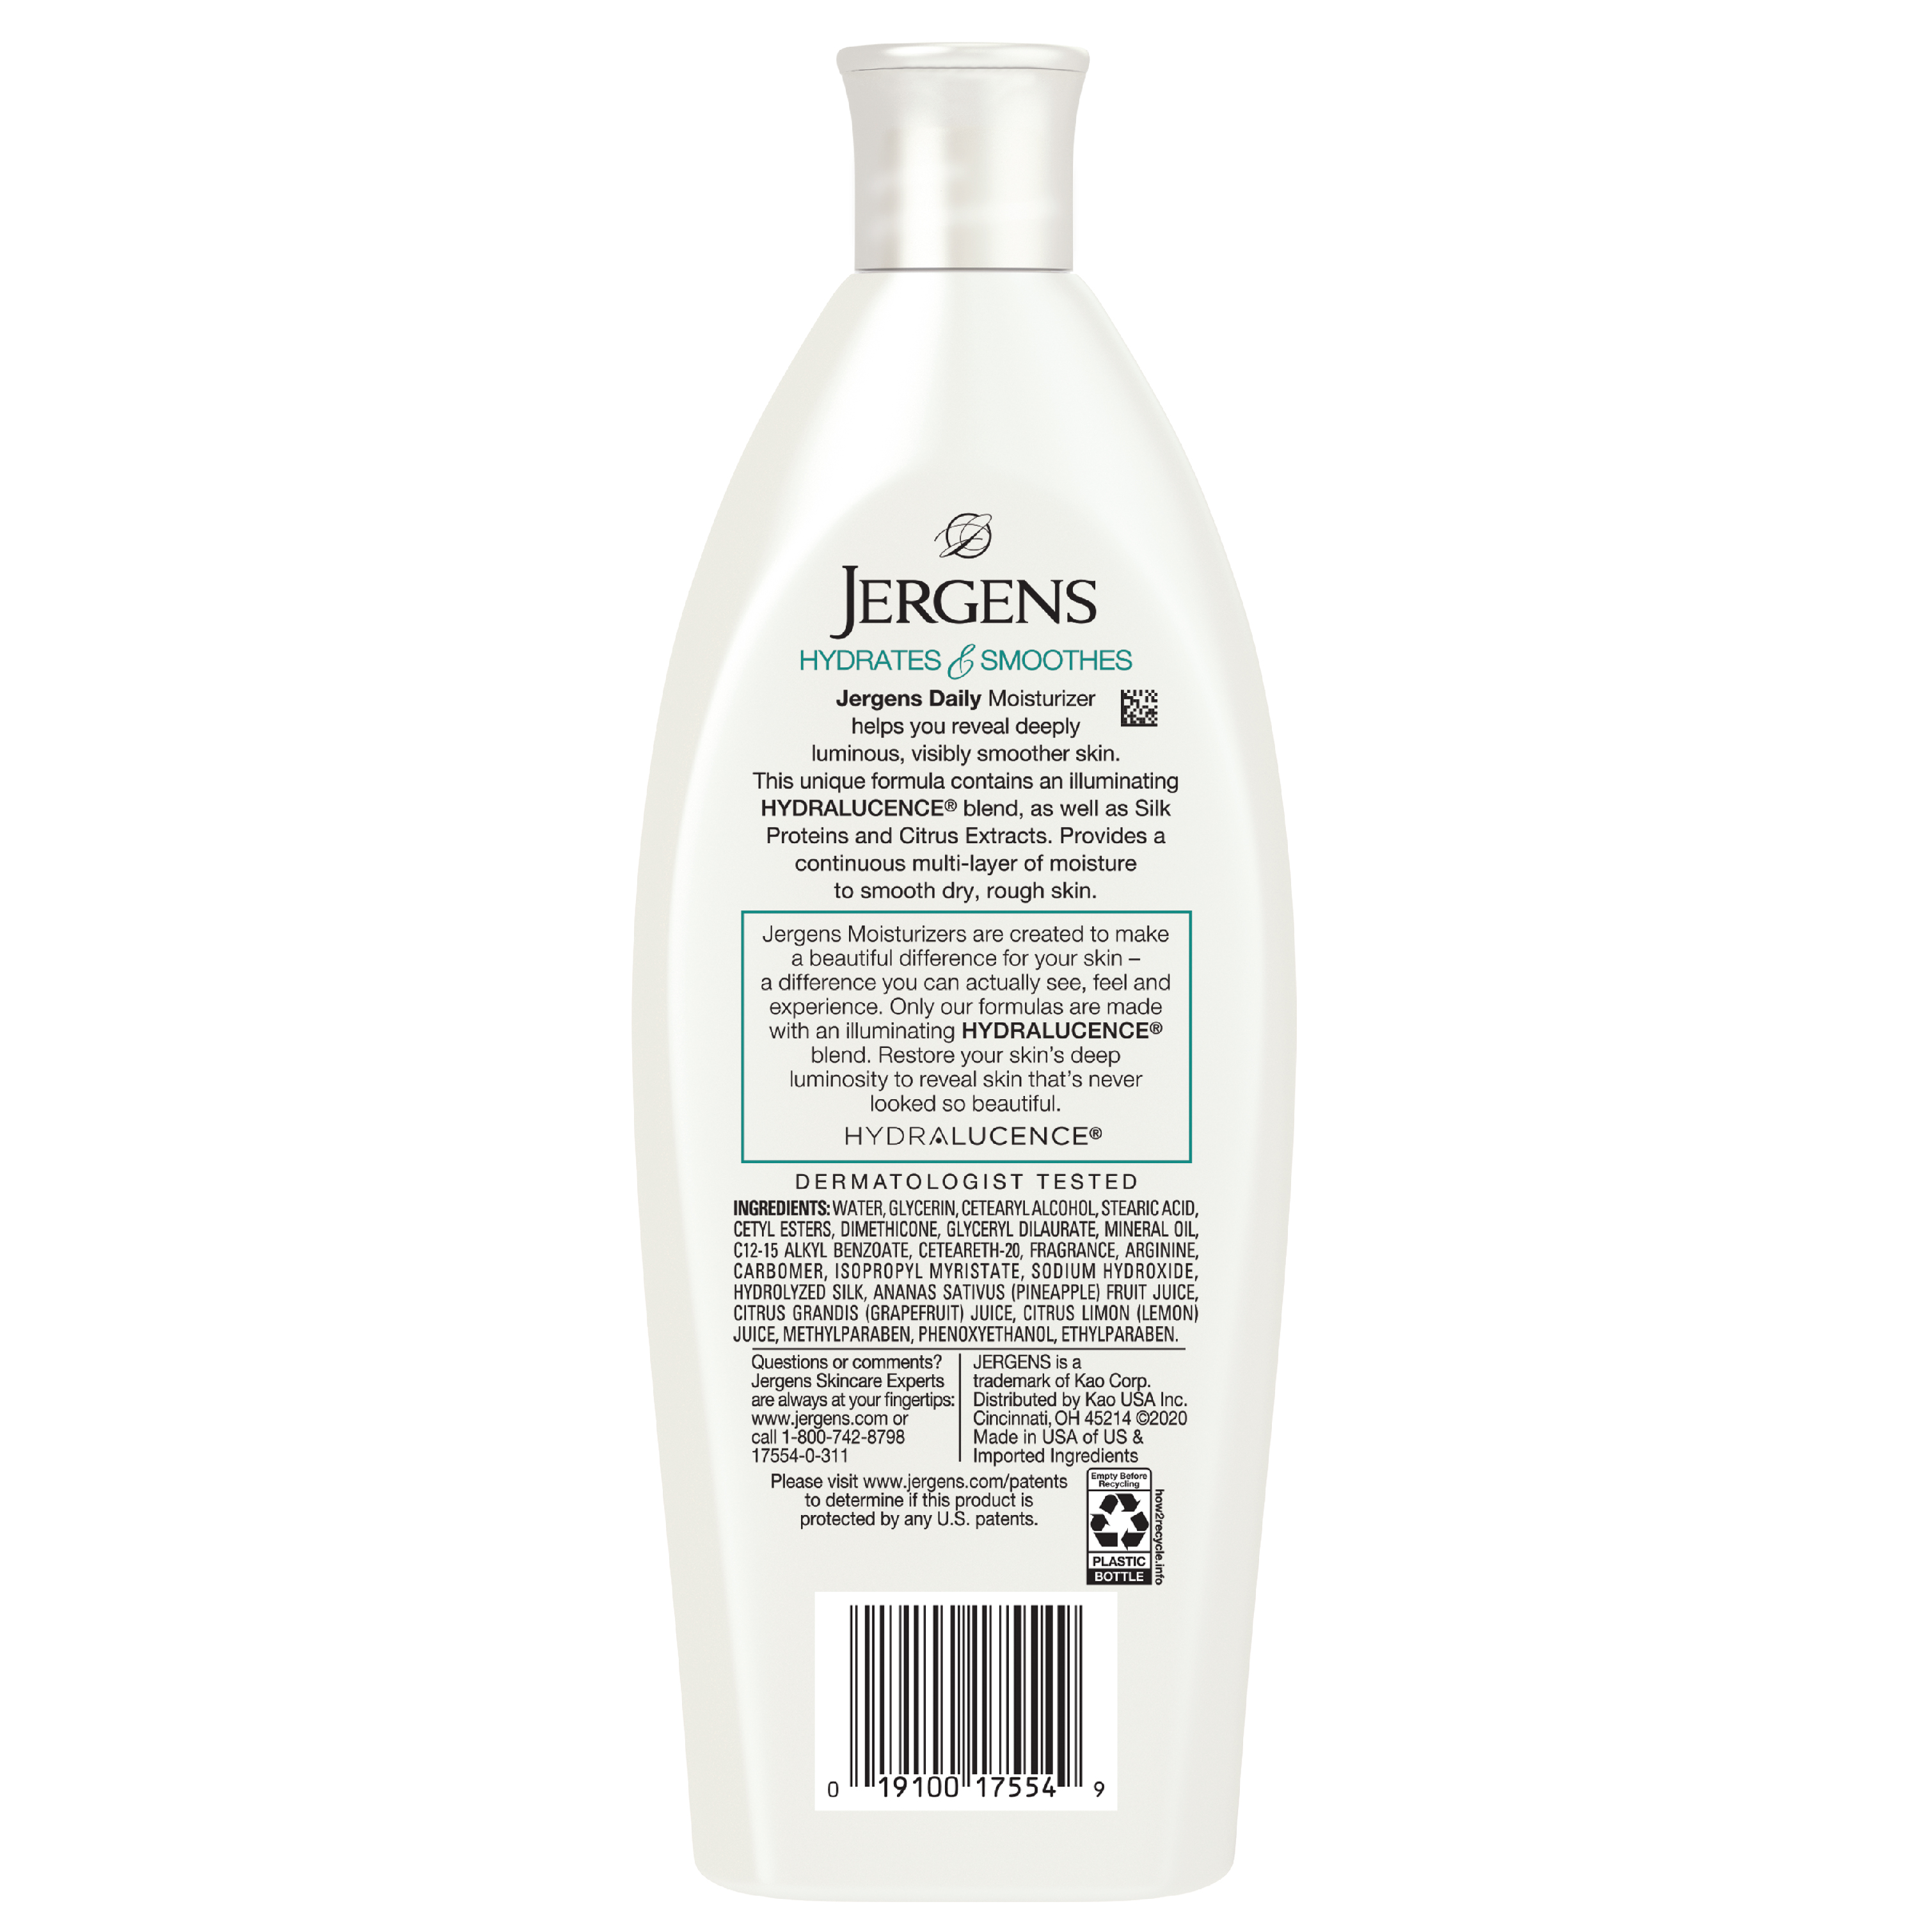 slide 5 of 5, Jergens Daily Moisture Dry Skin Moisturizer, 10 Ounce Body Lotion, with HYDRALUCENCE blend, Silk Proteins, and Citrus Extract, to help Restore Skin Luminosity, 10 fl oz